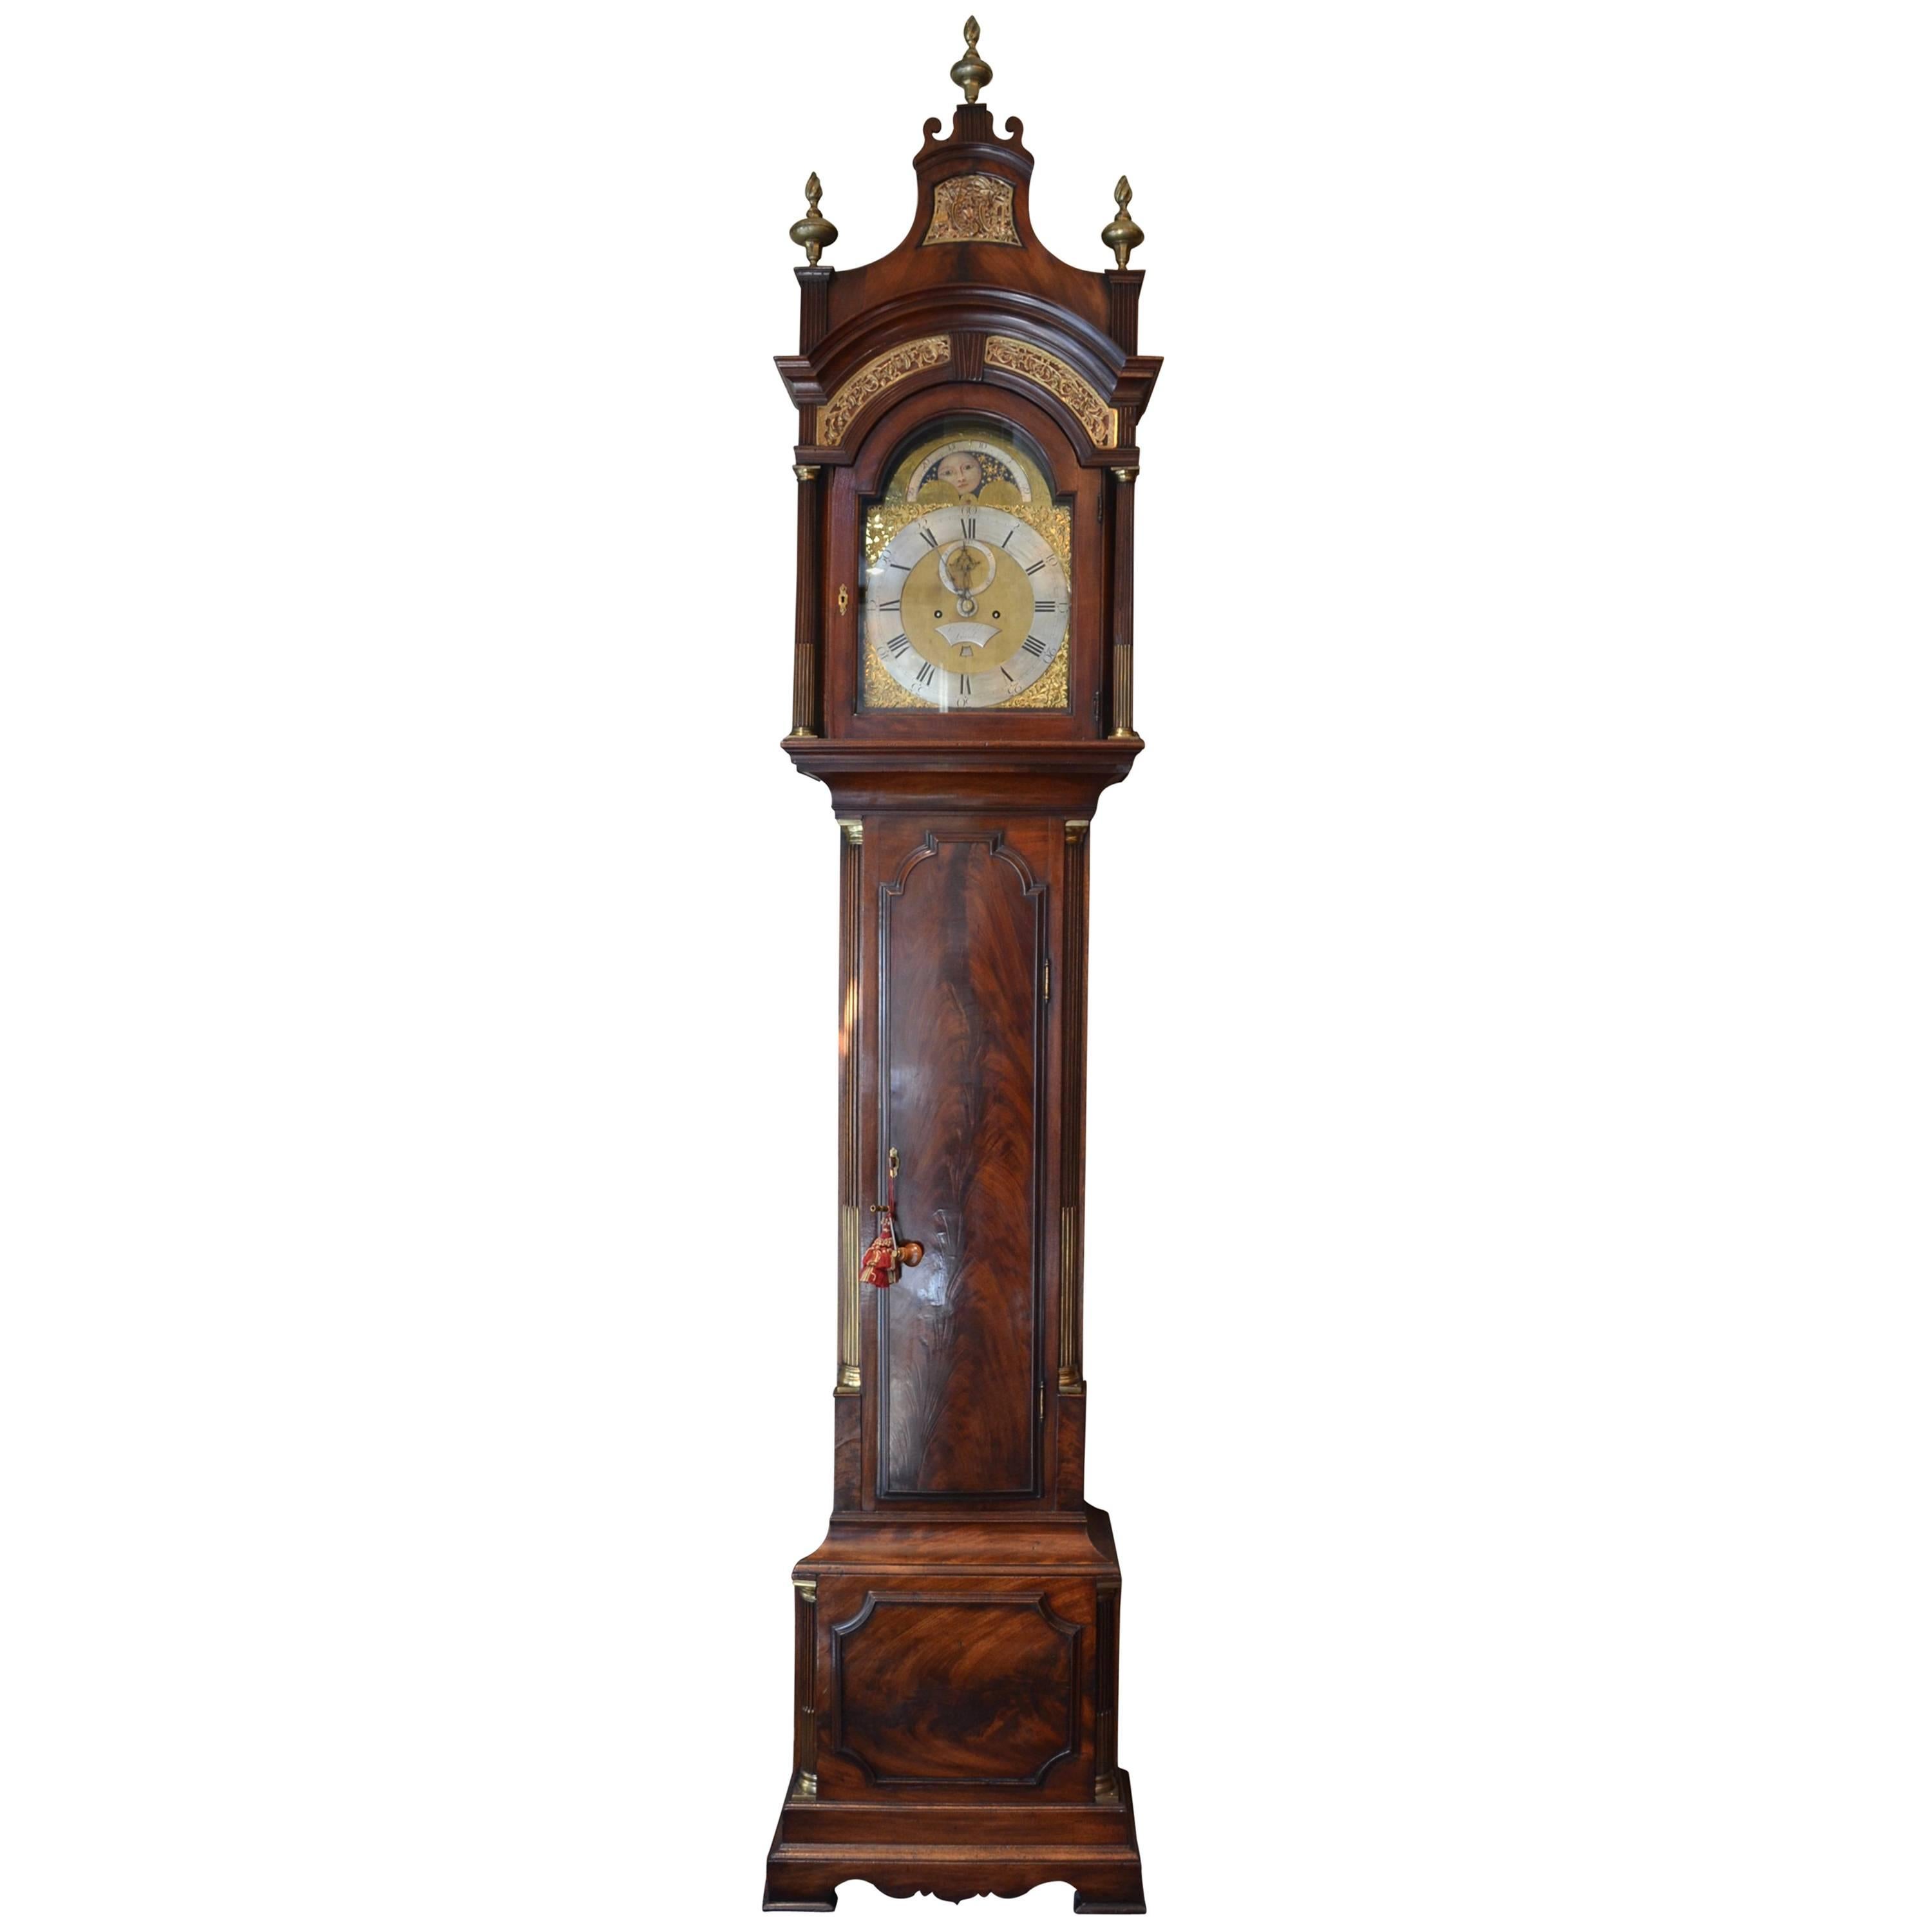 Antique English George III Flame Mahogany Tall Case Clock by Peter Pohlman